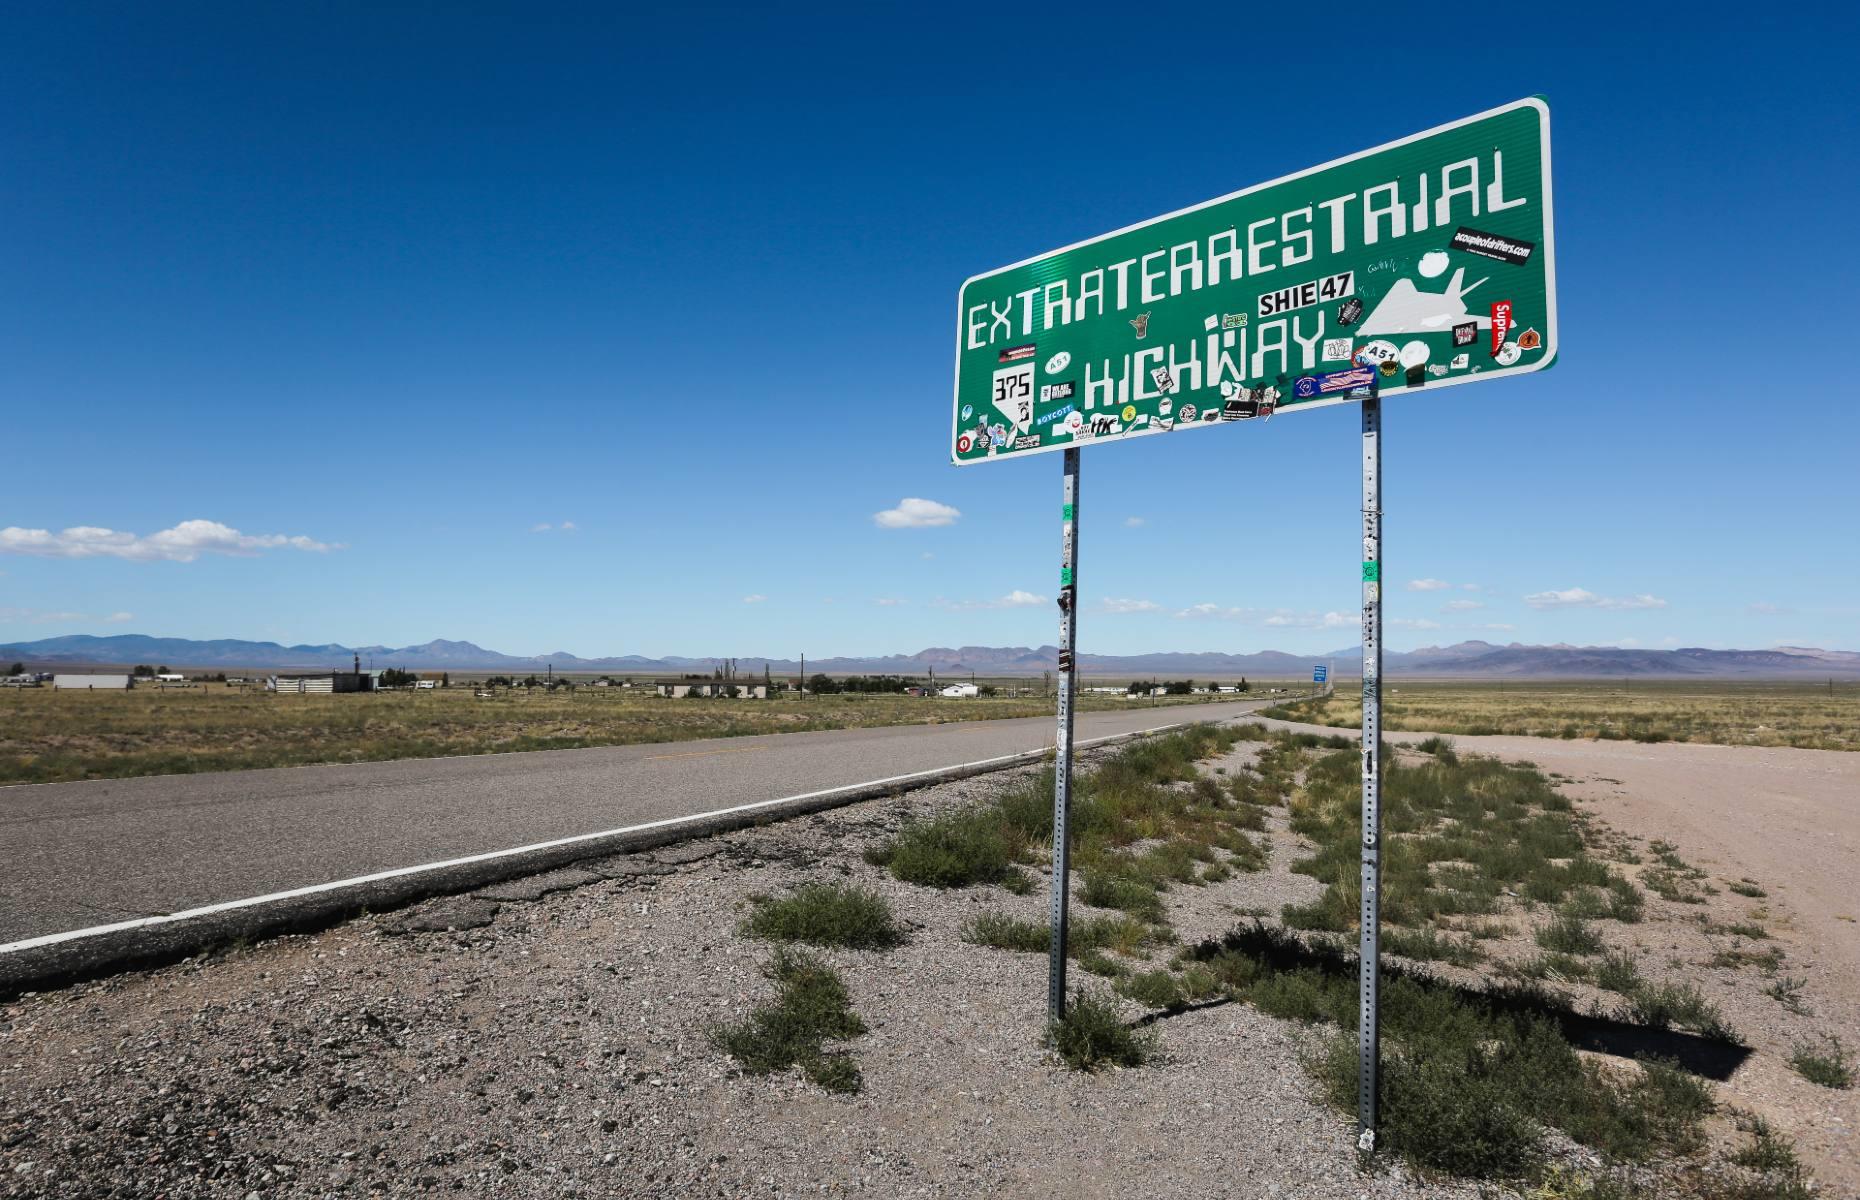 <p>Forget about wildlife spotting, it's all about alien spotting on this weird and wonderful adventure along the Extraterrestrial Highway (AKA Highway 375) in southern Nevada. The <a href="https://travelnevada.com/road-trips/extraterrestrial-highway/">470-mile (756km) loop</a> will take you into parts of the state that are steeped in mysterious sightings, including Rachel. Known as the UFO capital of the world, this former mining town with a population of 48 draws alien spotters and UFO enthusiasts from around the US and beyond hoping to see some extraterrestrial activity.</p>